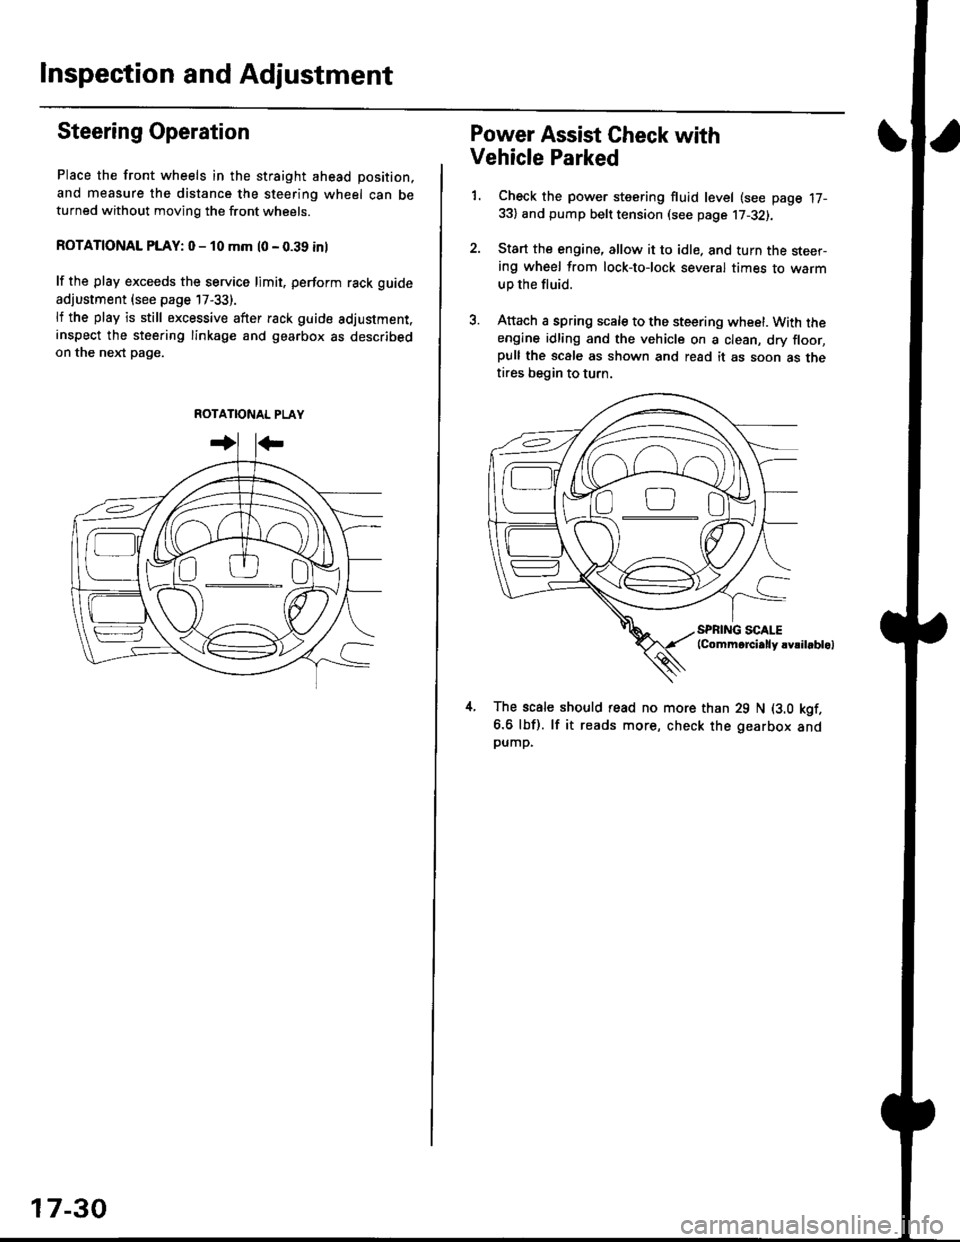 HONDA CIVIC 1997 6.G Workshop Manual Inspection and Adjustment
Steering Operation
Place the front wheels in the straight ahead position,
and measure the distance the steering wheel can beturned without moving the front wheels.
ROTATIONAL